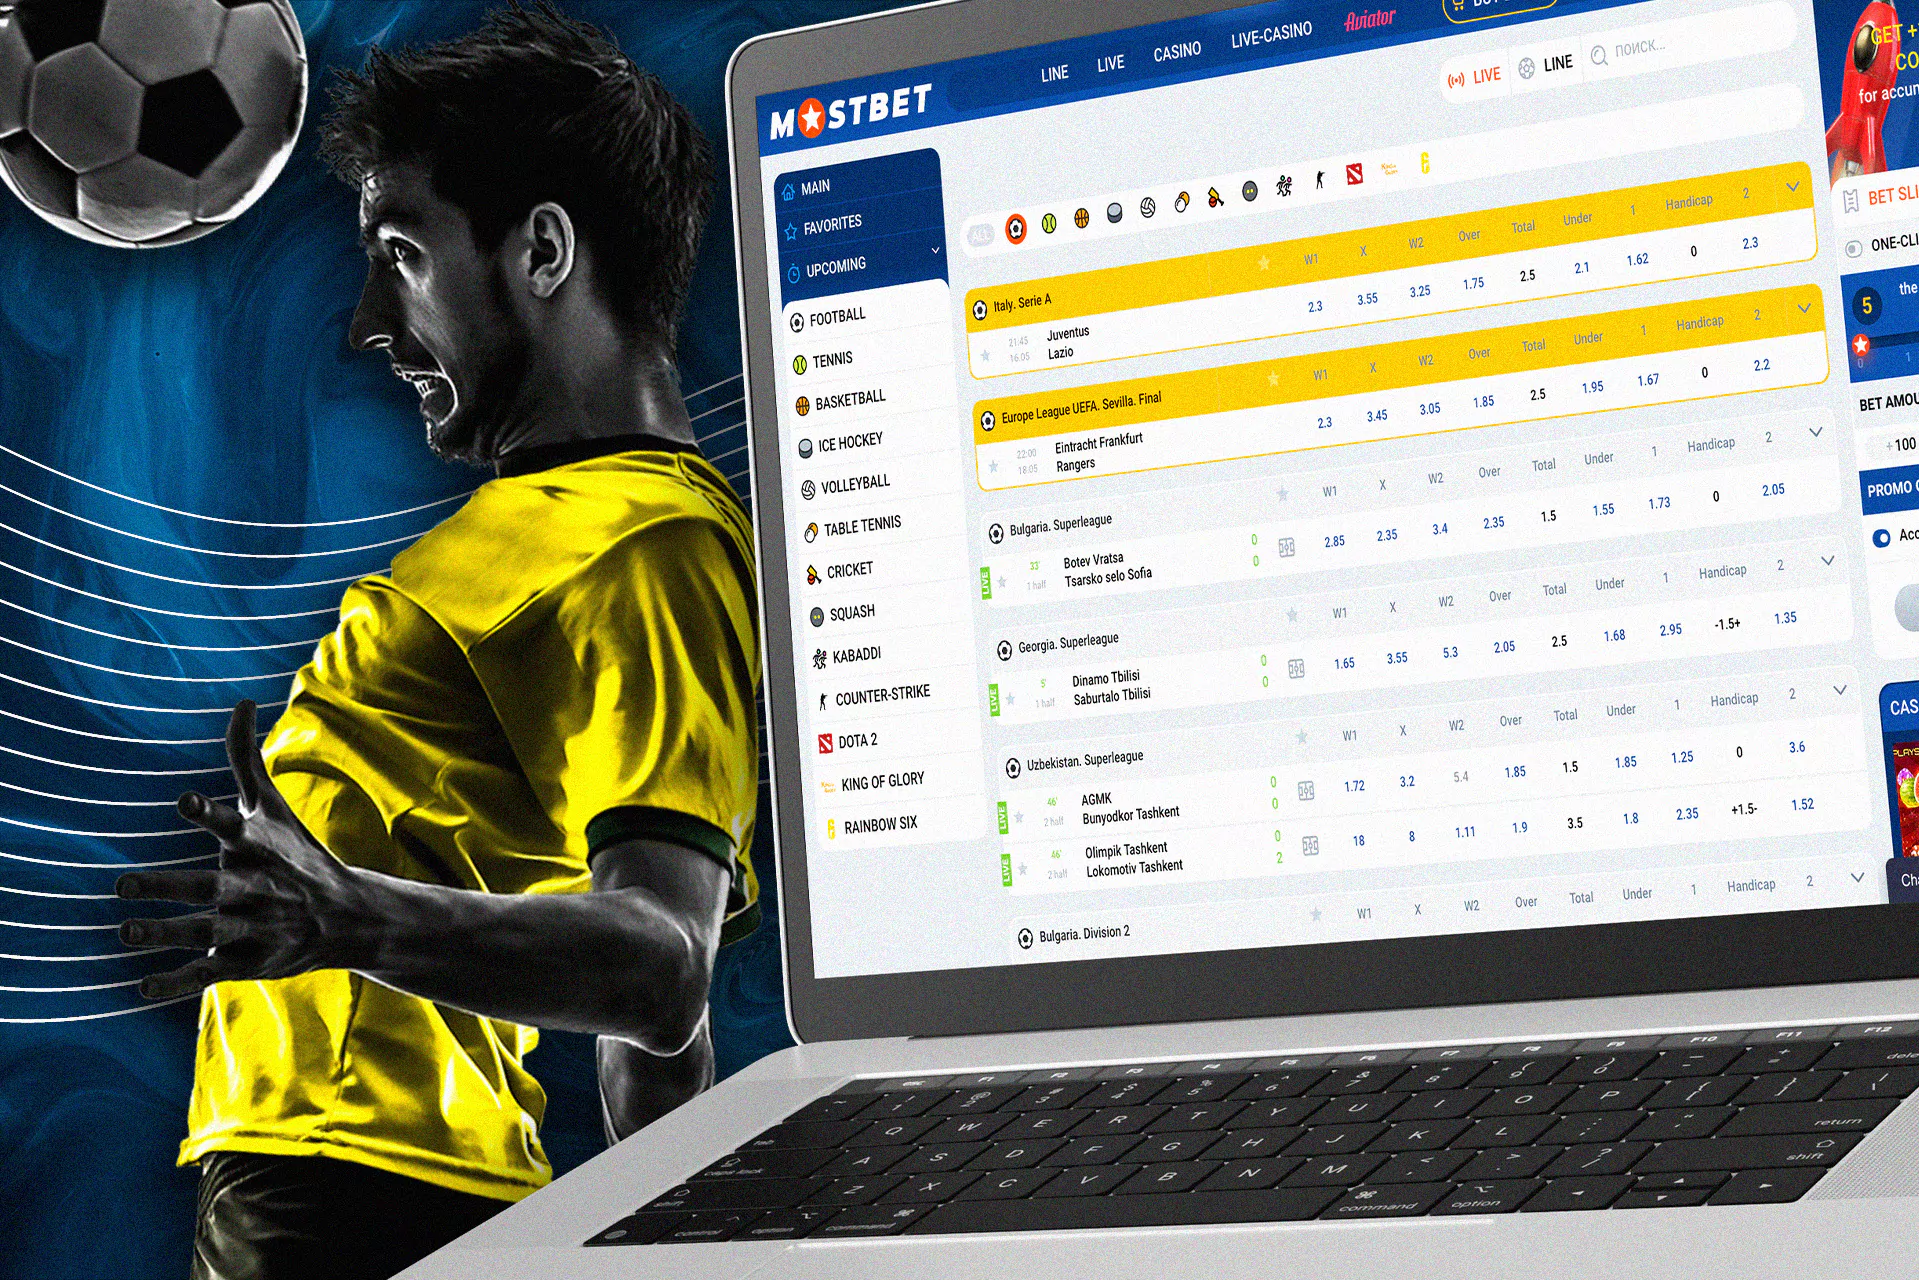 Live betting section in the category "Football", a list of current matches available for bets.